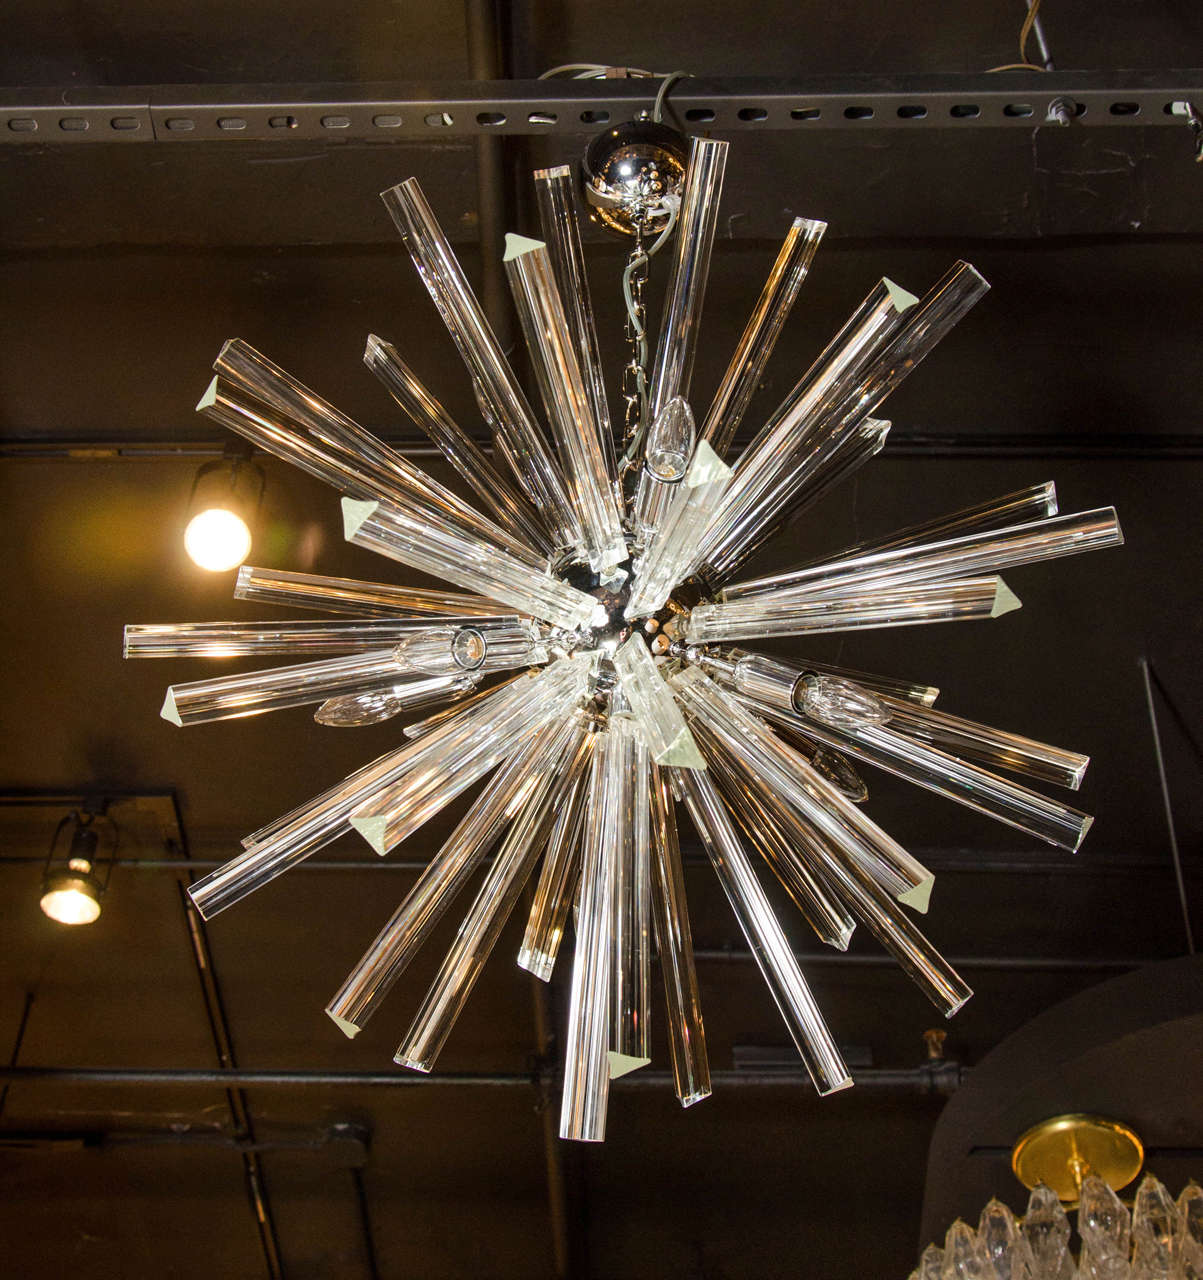 This striking Mid-Century Modernist chandelier features a Sputnik design, numerous Murano glass triedre shaped rods emanating from a chrome spherical centre, and has nine bulbs (providing up to 75 watts per bulb). It has been newly rewired to